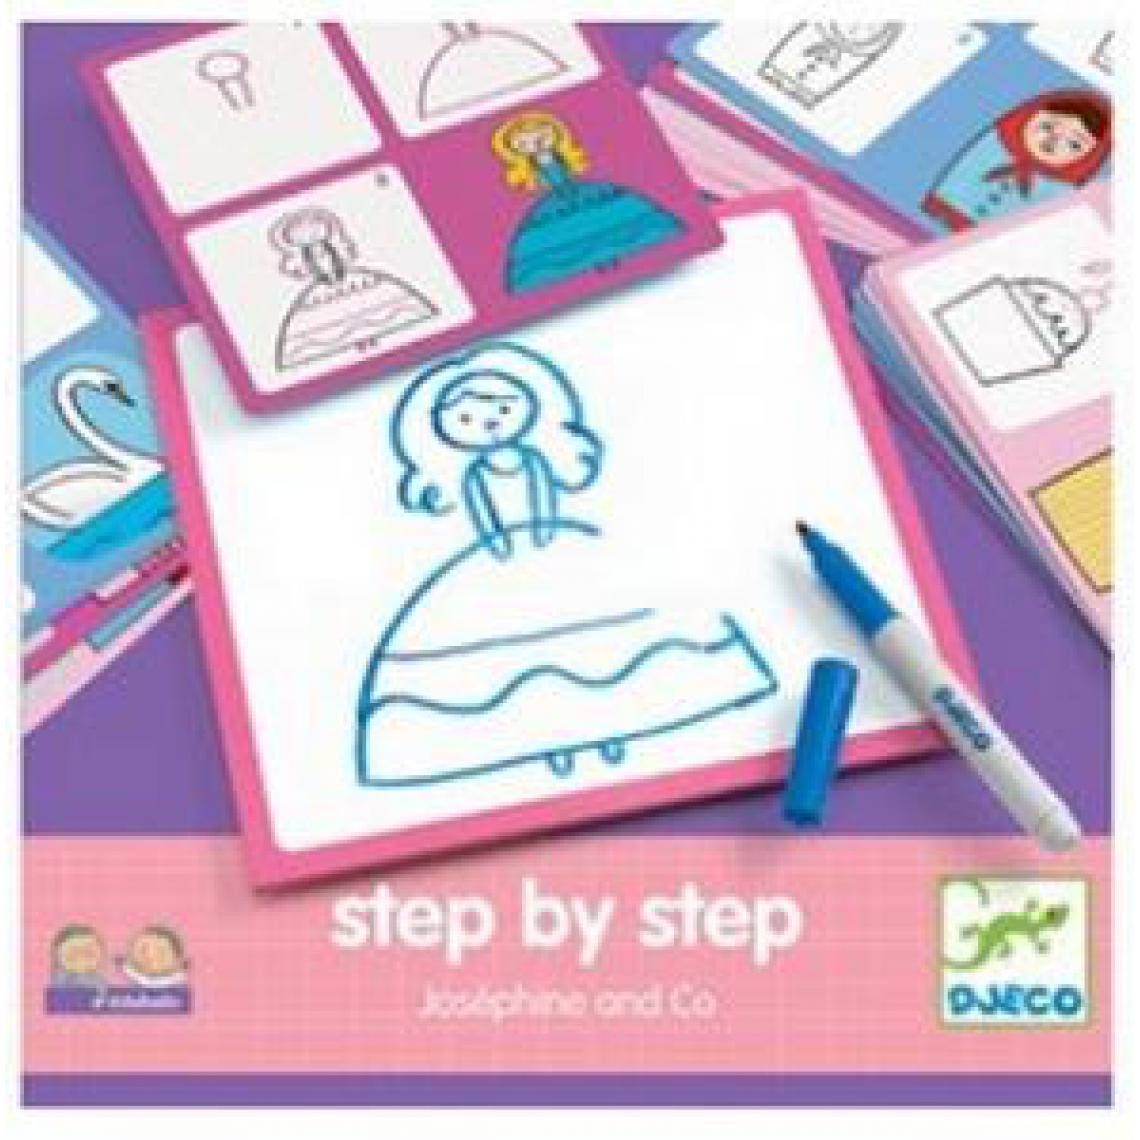 Djeco - Step by Step Josephine and co - Dessin et peinture